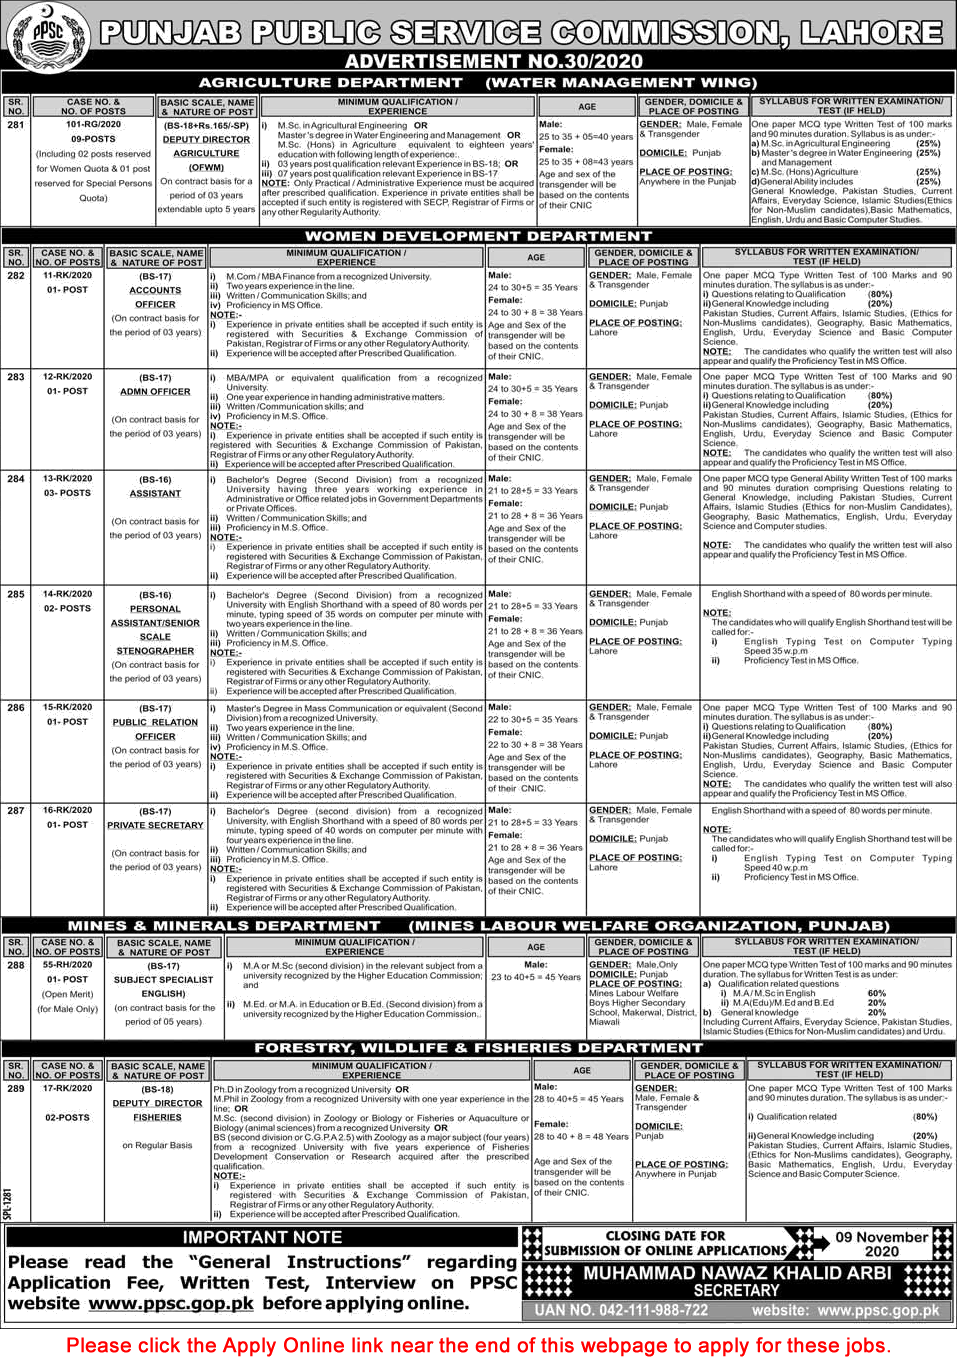 PPSC Jobs October 2020 Apply Online Consolidated Advertisement No. 30/2020 Latest